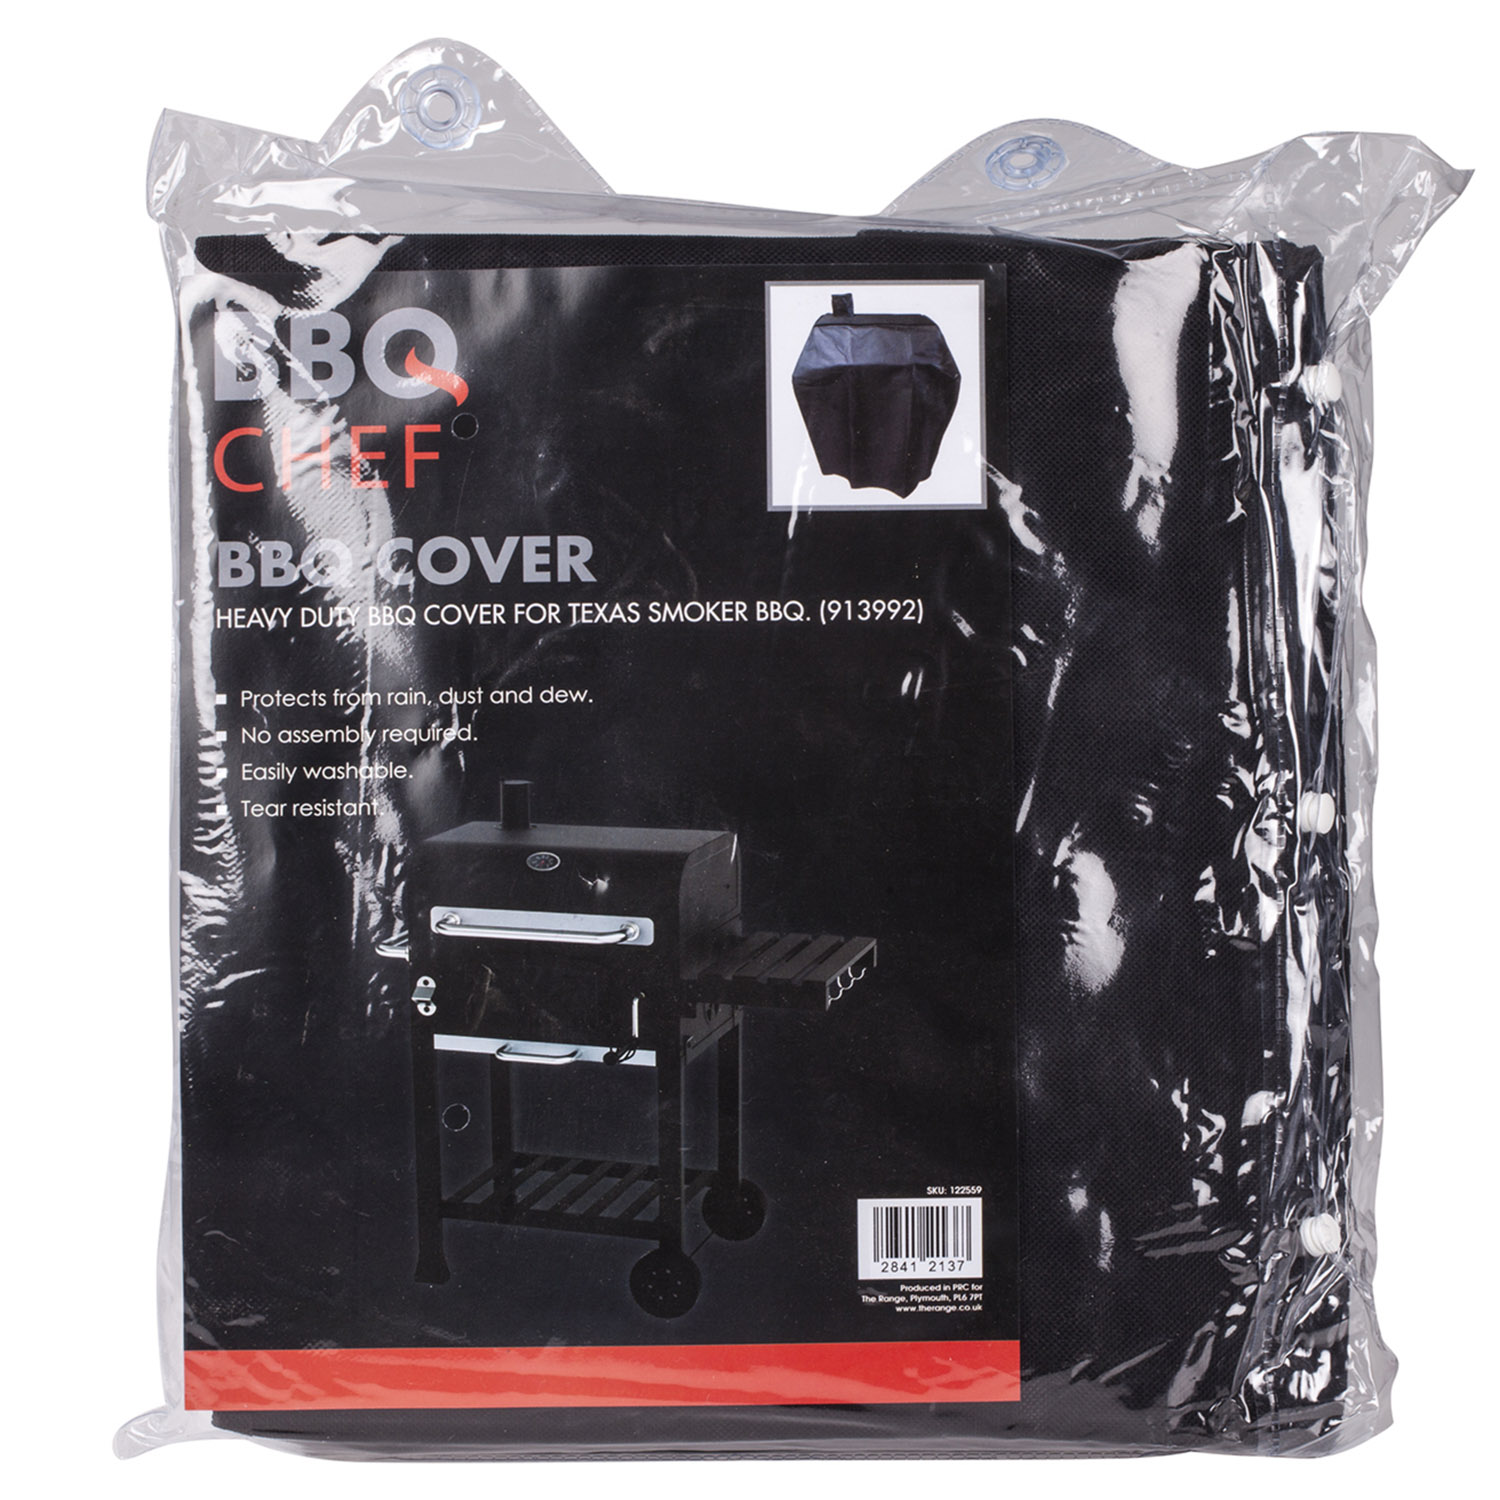 BBQ Chef Heavy Duty Cover For Texas Smoker BBQ Image